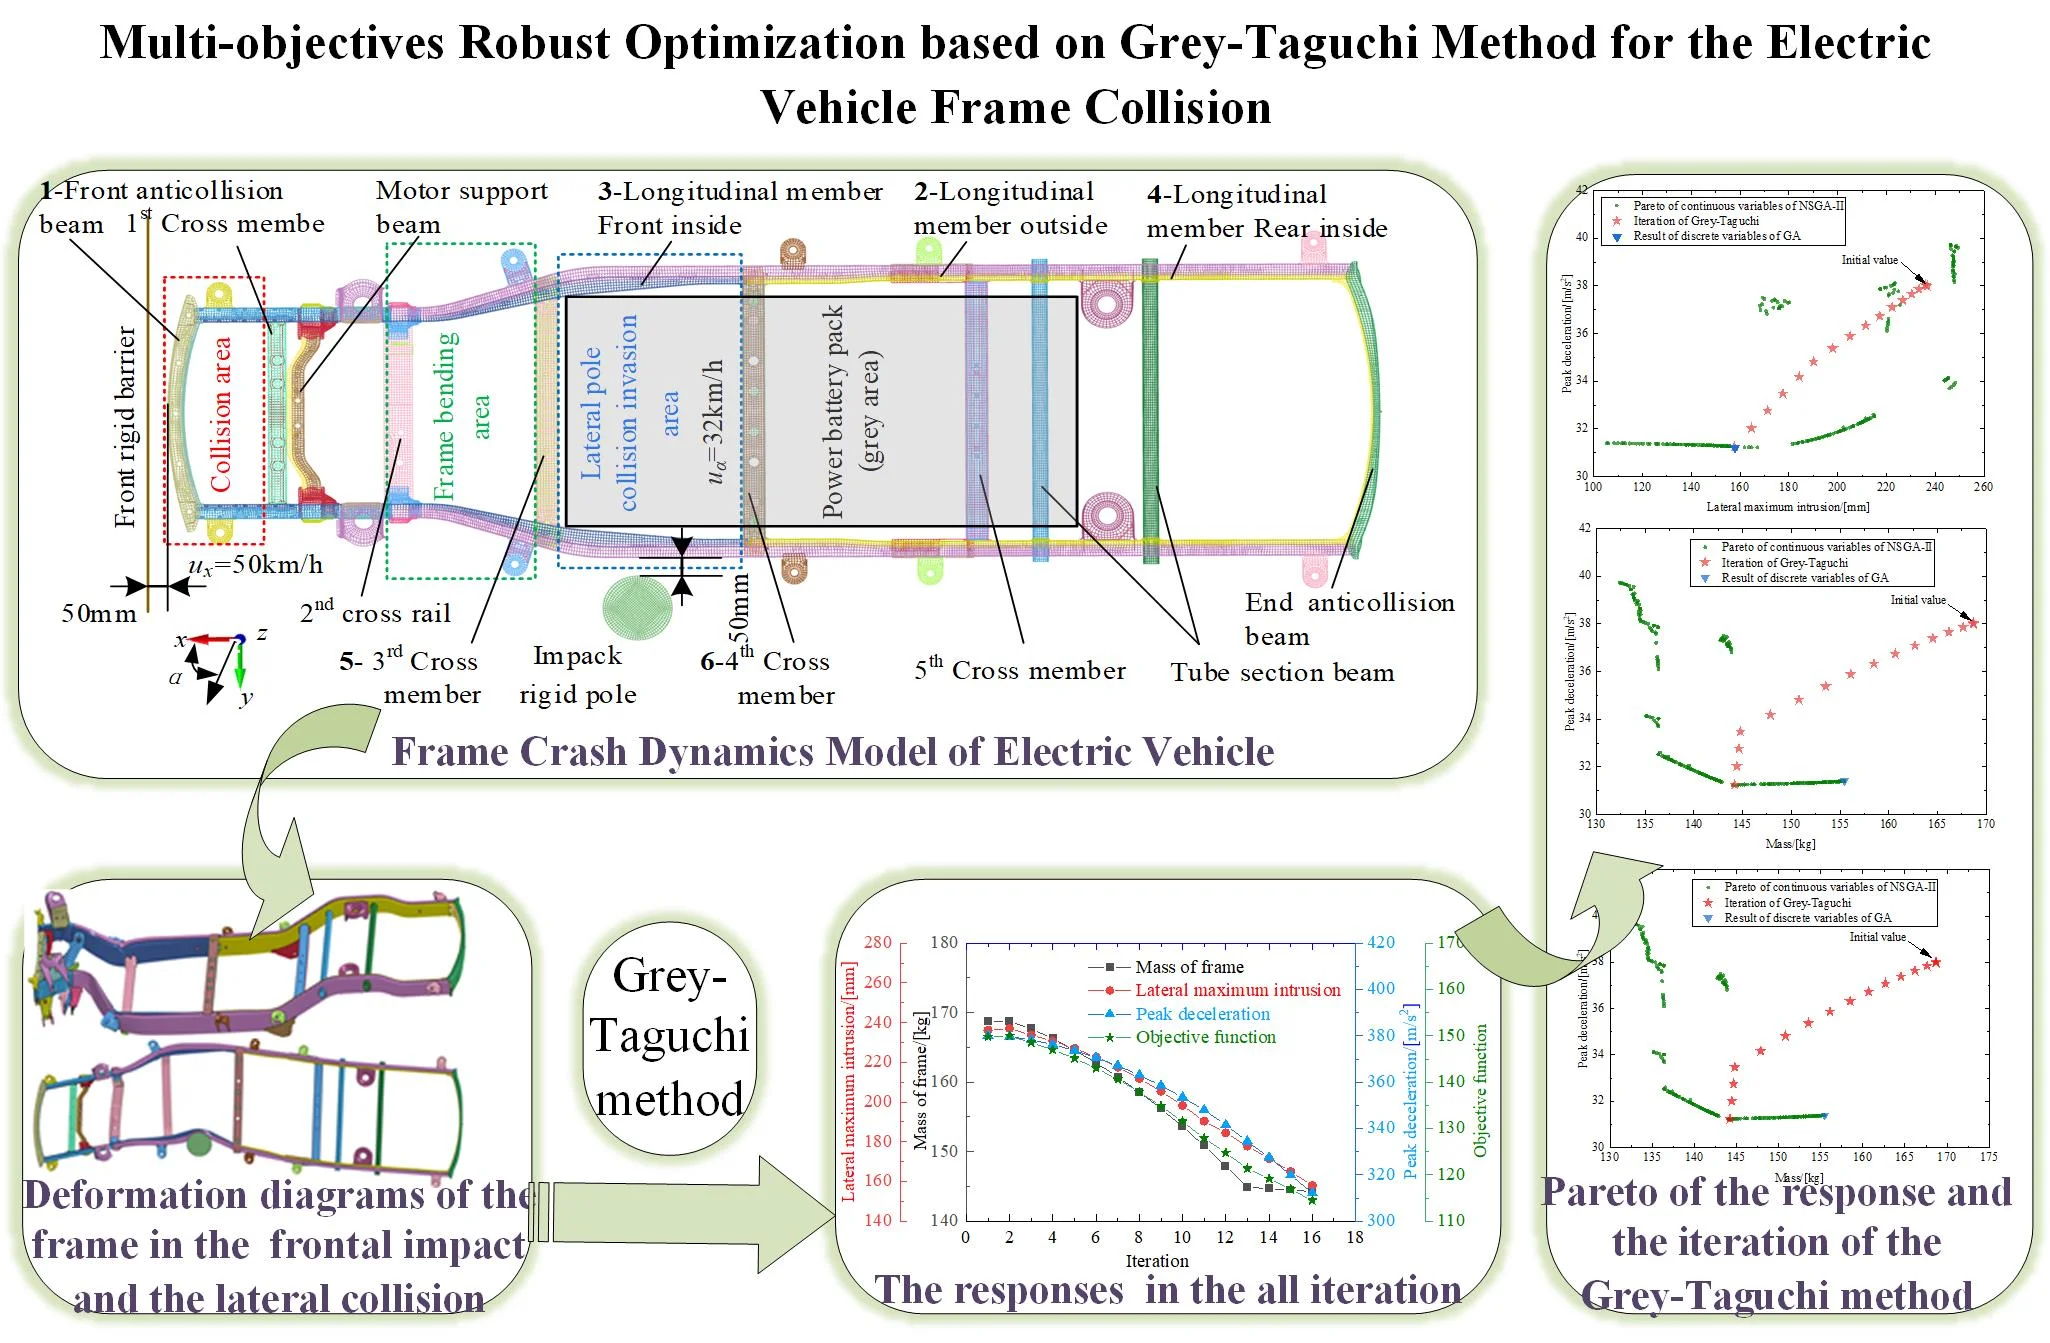 Multi-objectives robust optimization based on Grey-Taguchi method for the electric vehicle frame collision